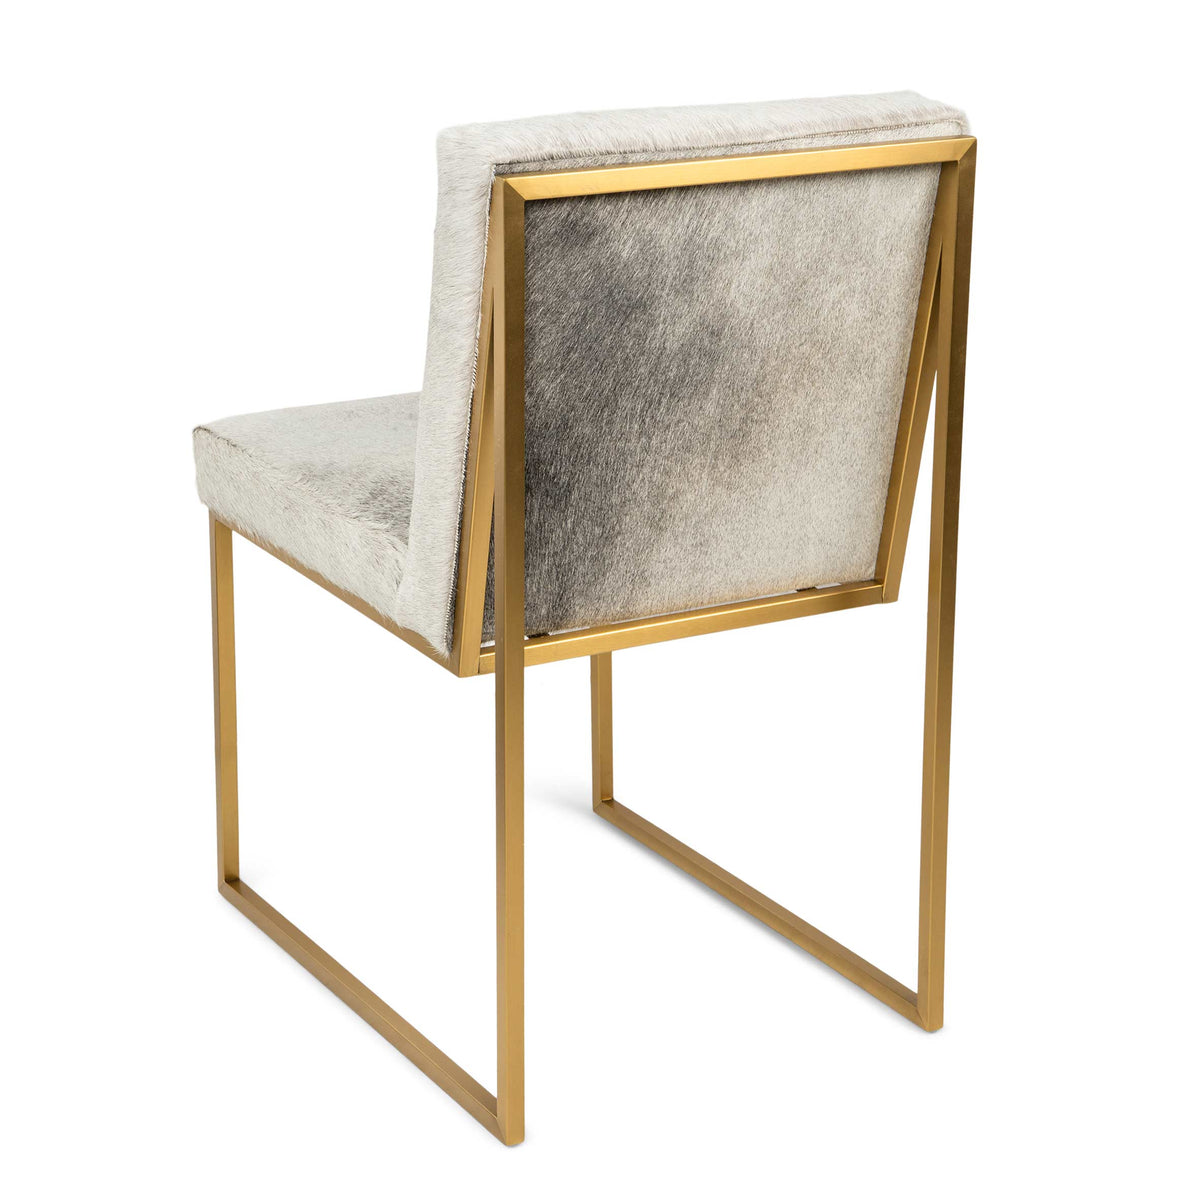 Goldfinger Dining Chair in Cowhide